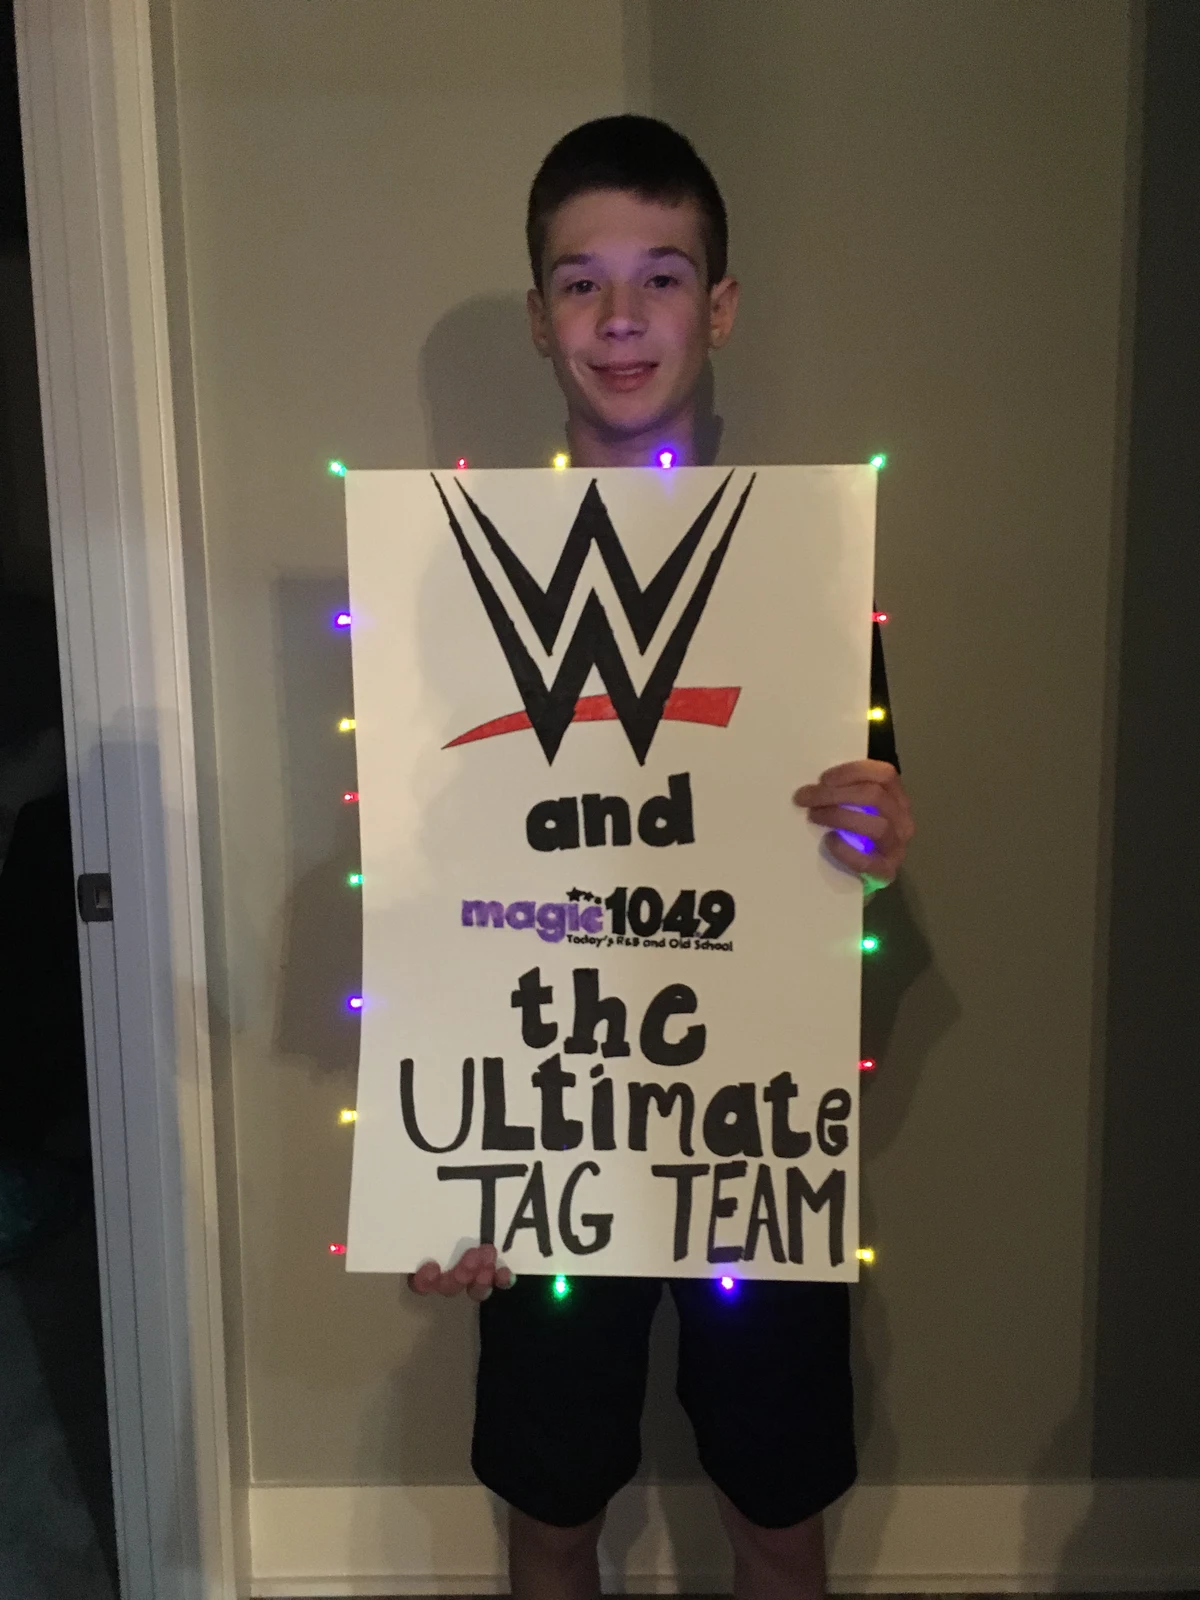 WWE Magic 104.9 Sign Check it out tonight on Smackdown Live at Van